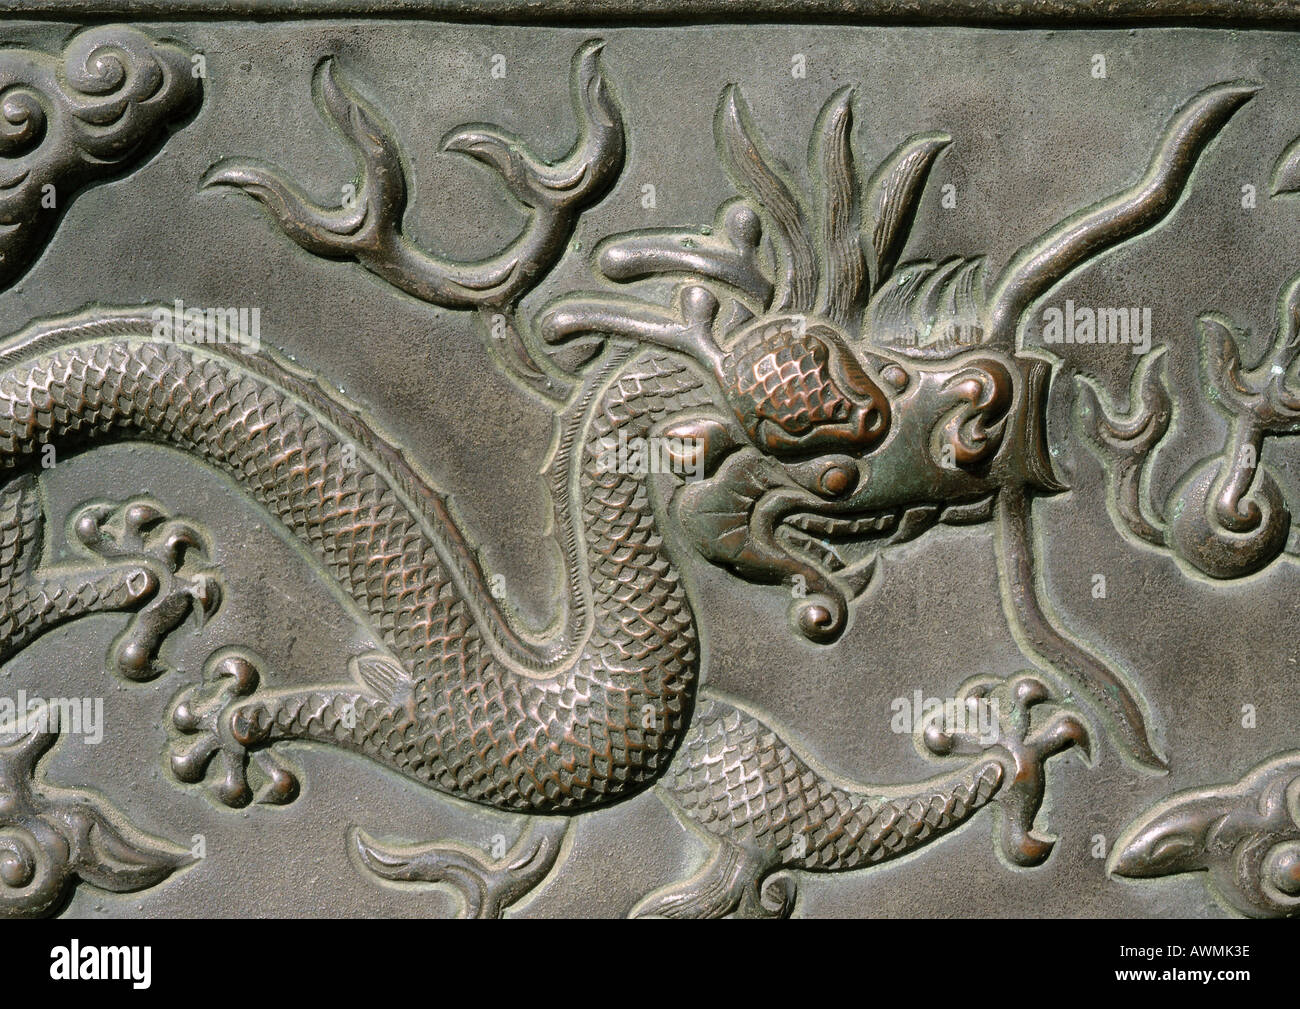 Stone Relief With Dragon Analysis